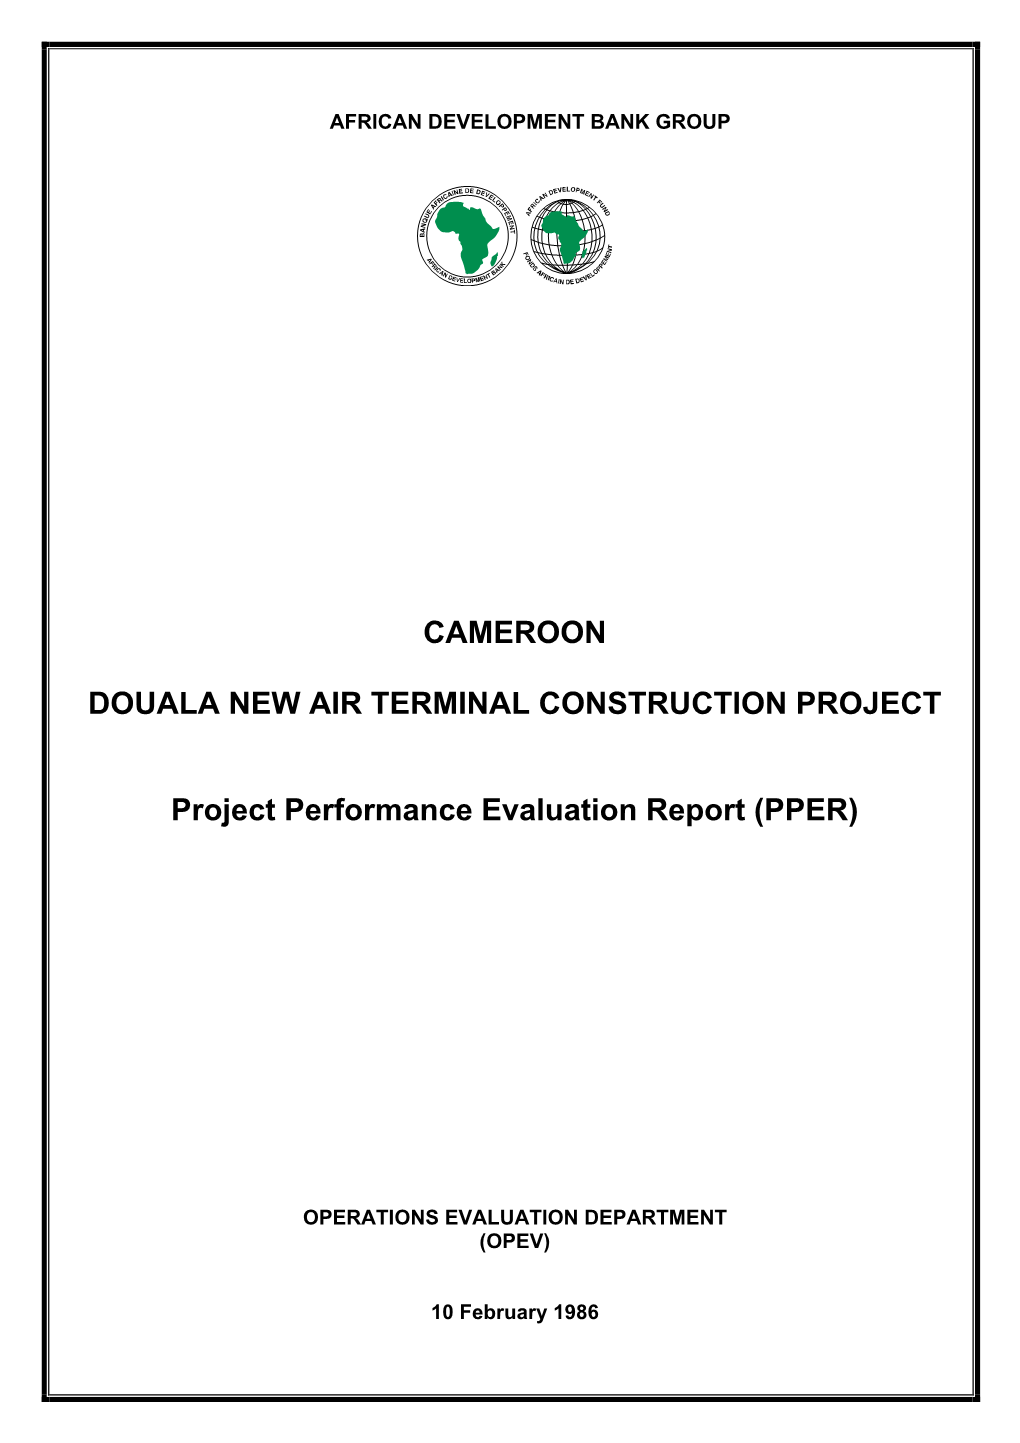 Cameroon: Douala New Air Terminal Construction Project